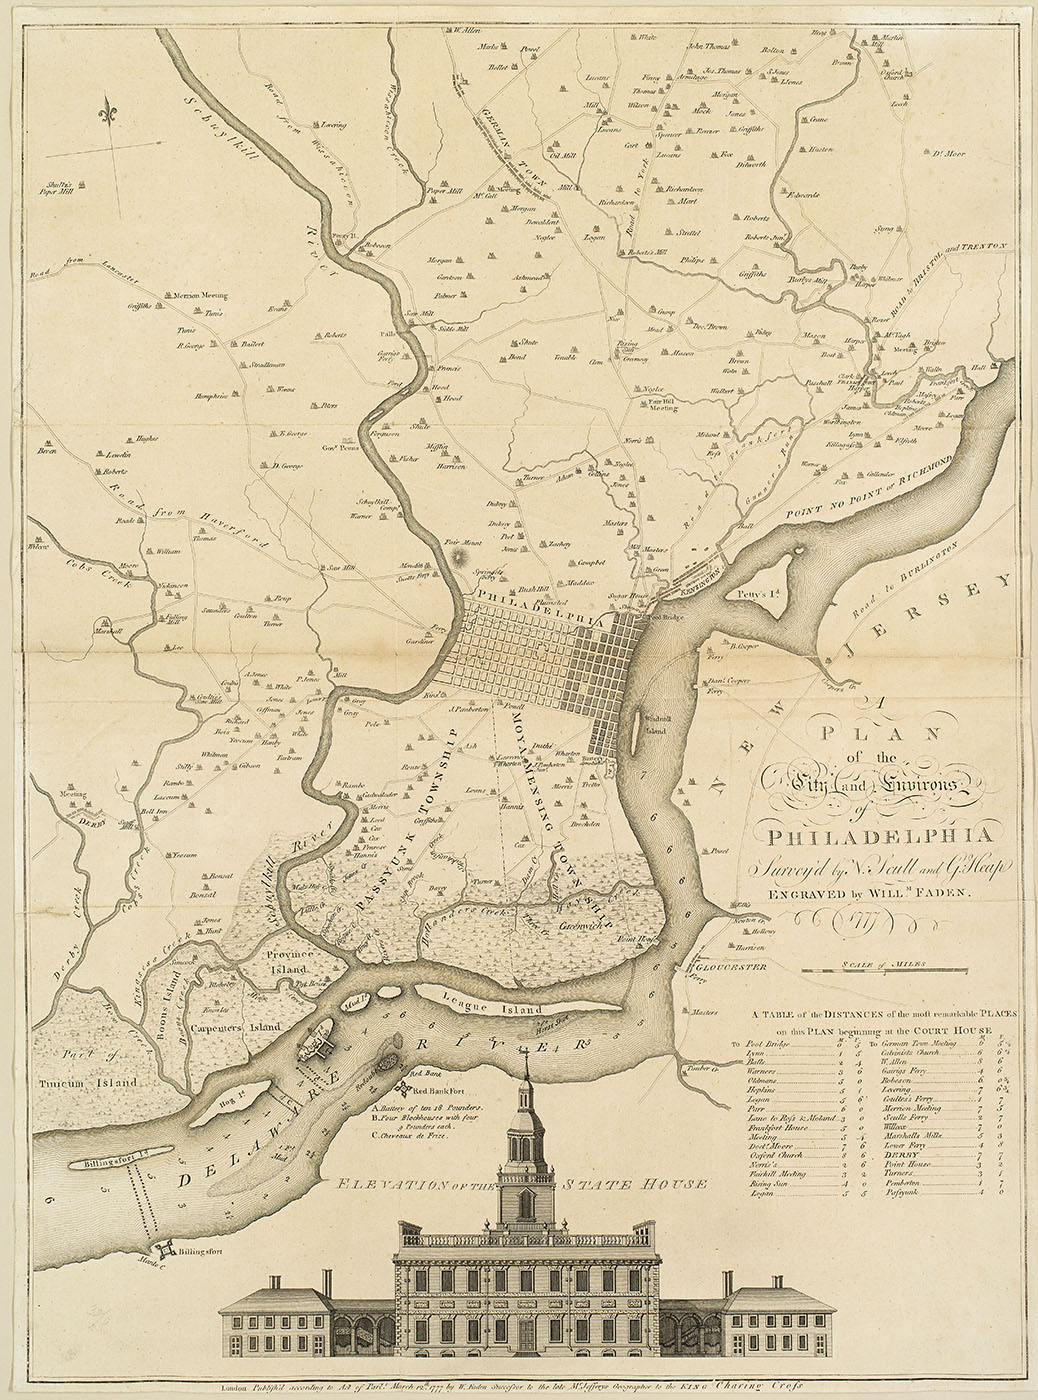 Plan of the City and Environs of Philadelphia, surveyed by N. Scull and G. Heap, engraved by William Faden, London, England, 1777. (The Gilder Lehrman Institute of American History, GLC02118)